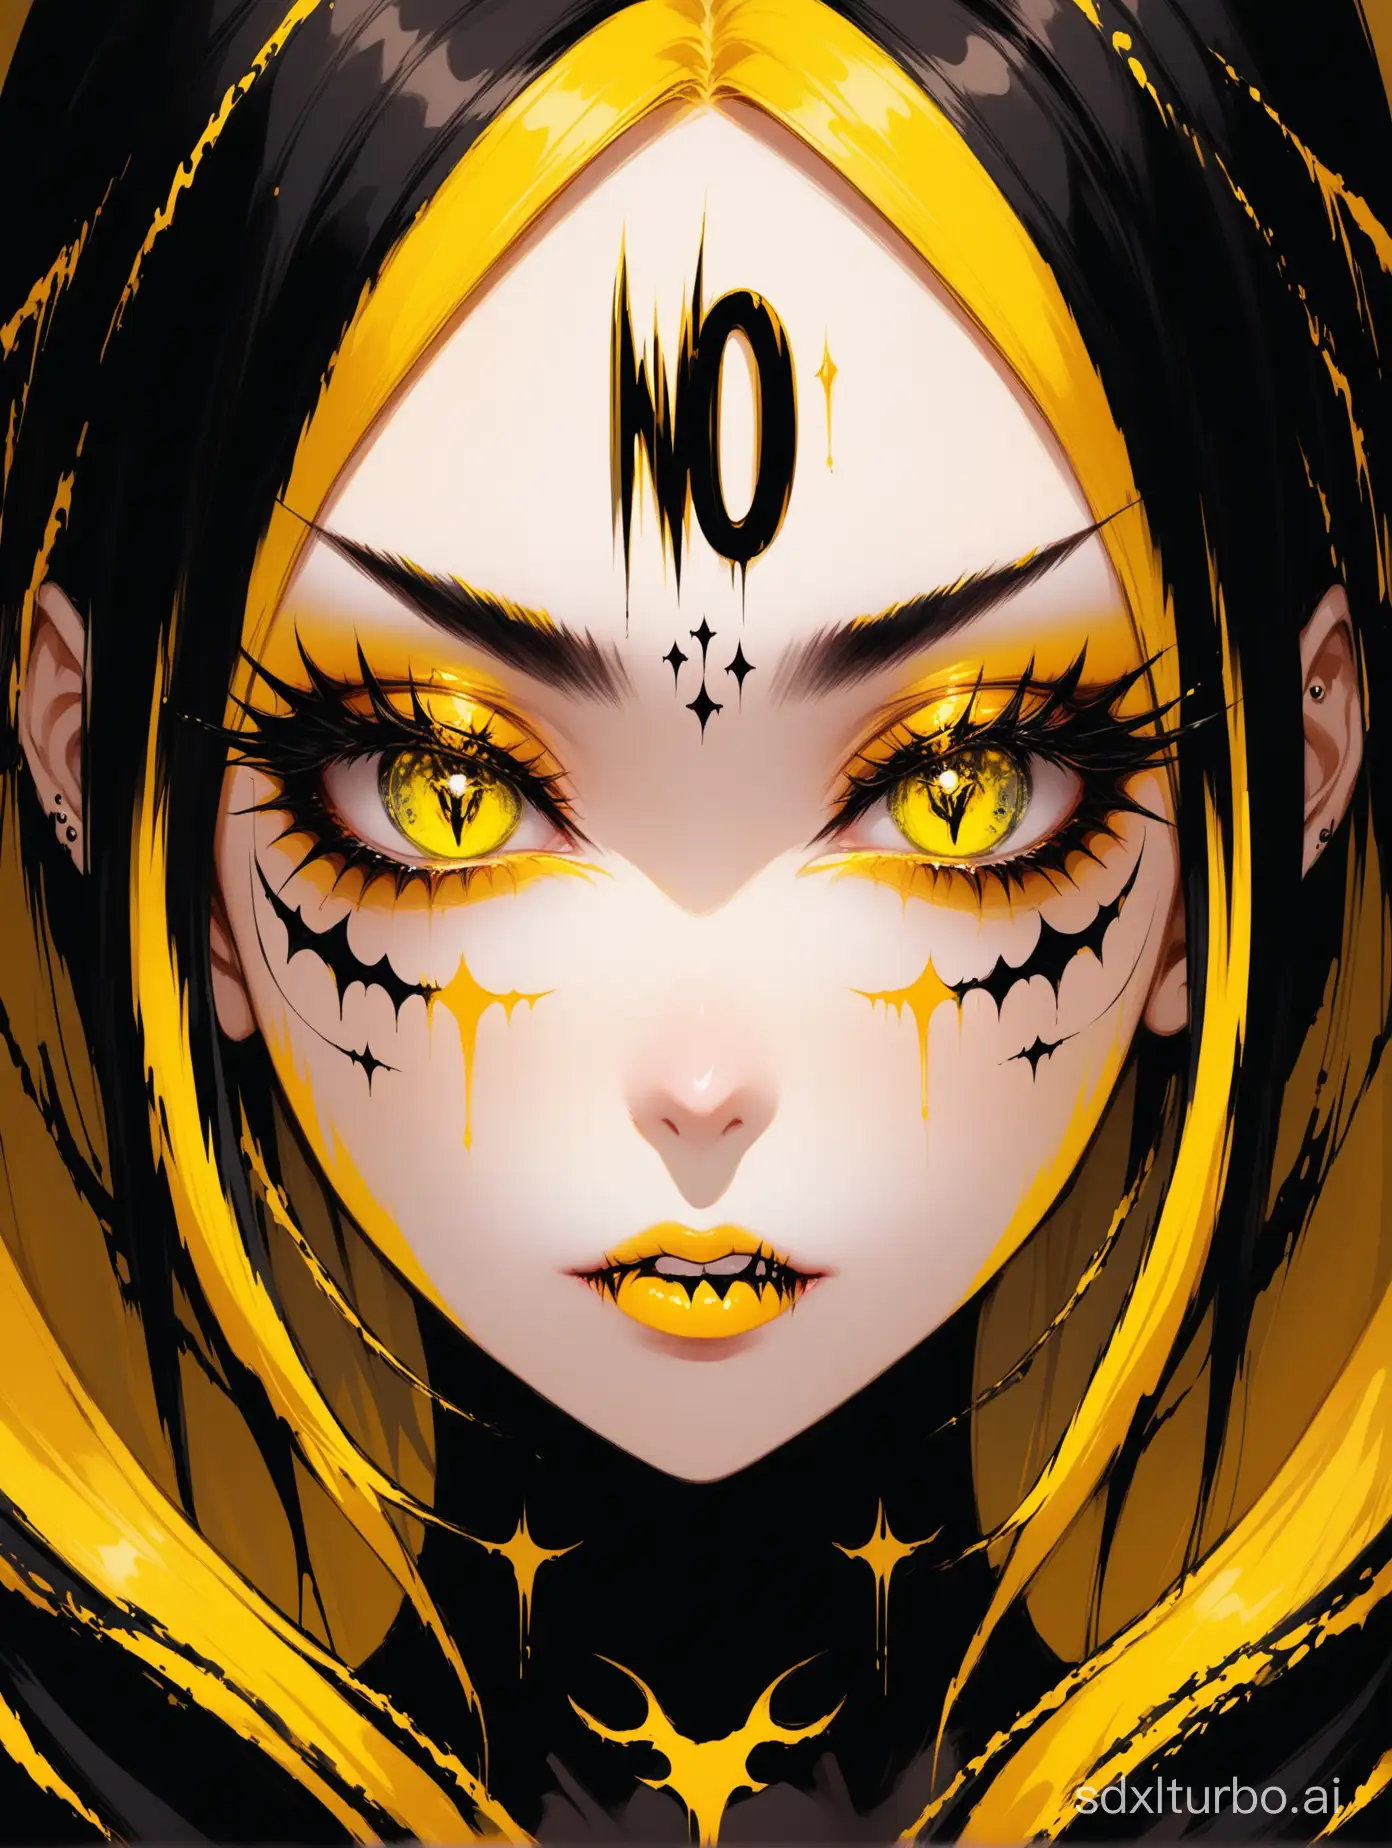 Spectacular-Demonic-Girl-with-NO-Inscription-Fantasy-Abstraction-in-Black-and-Yellow-Colors